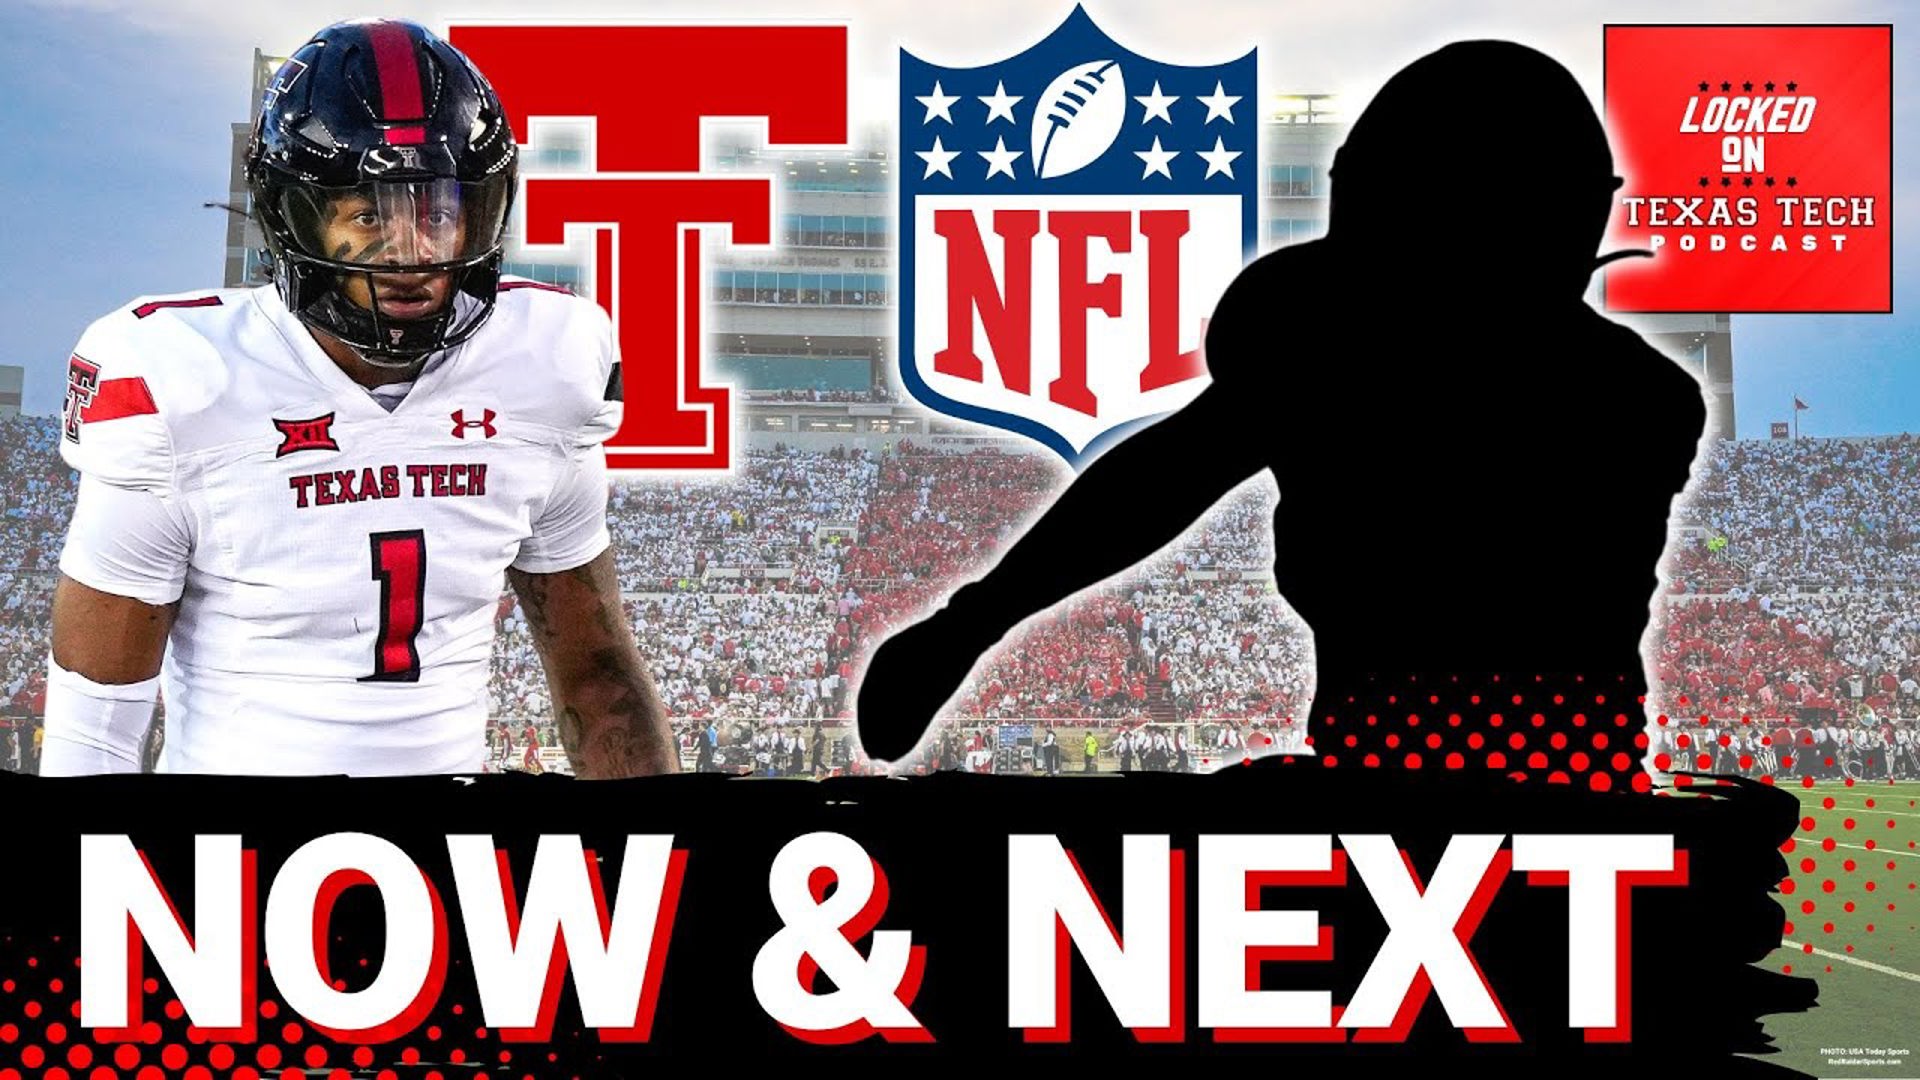 Today from Lubbock, TX, on Locked On Texas Tech:

- NFL Draft
- Rabbit, Cole, Owens
- prospects on campus now